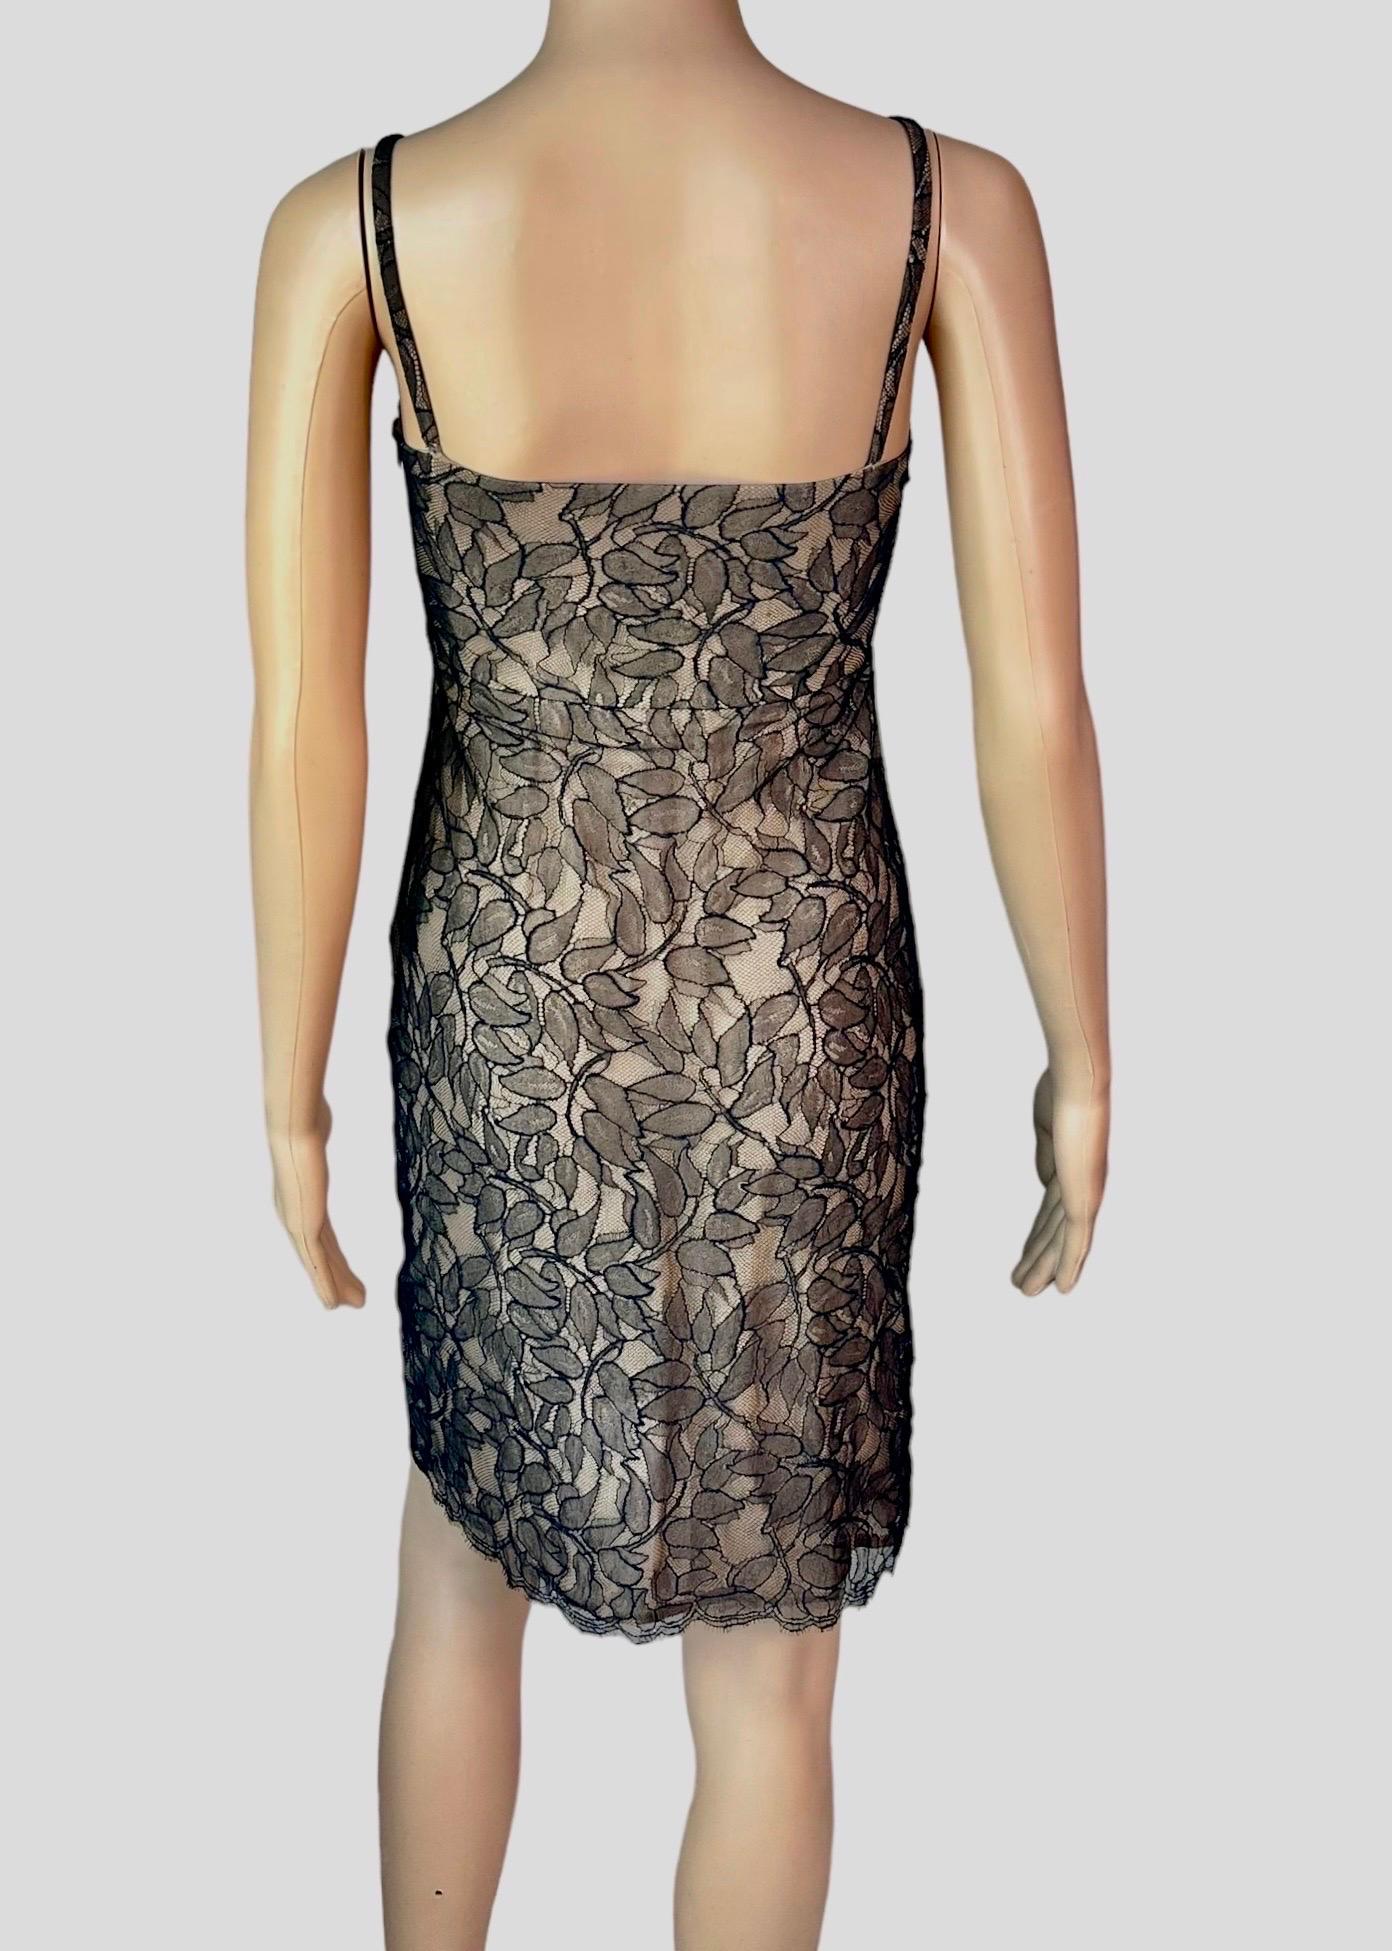 Women's or Men's Gianni Versace Istante c. 1998 Sheer Lace Mini Dress For Sale